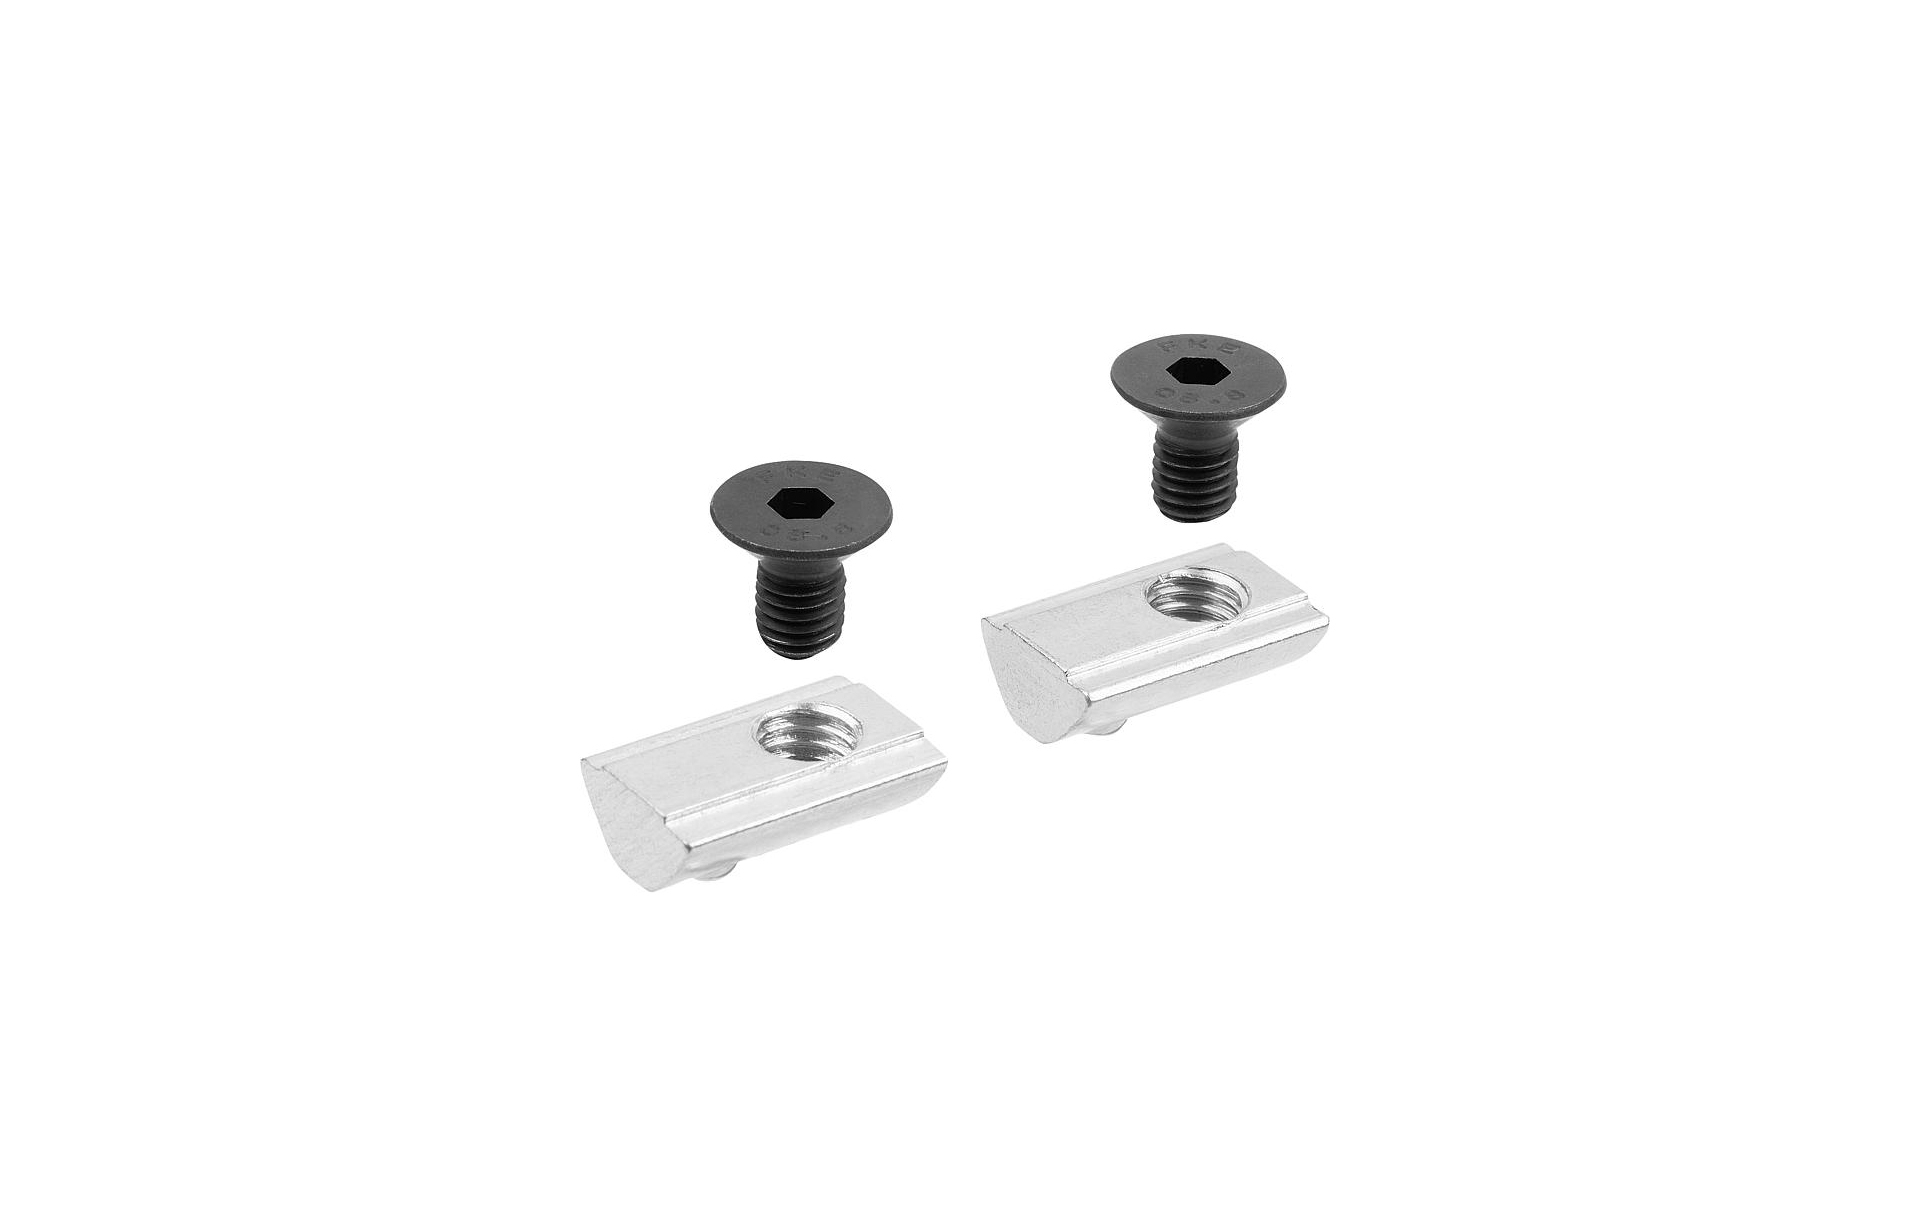 K1044 Fastening sets for straps and angles